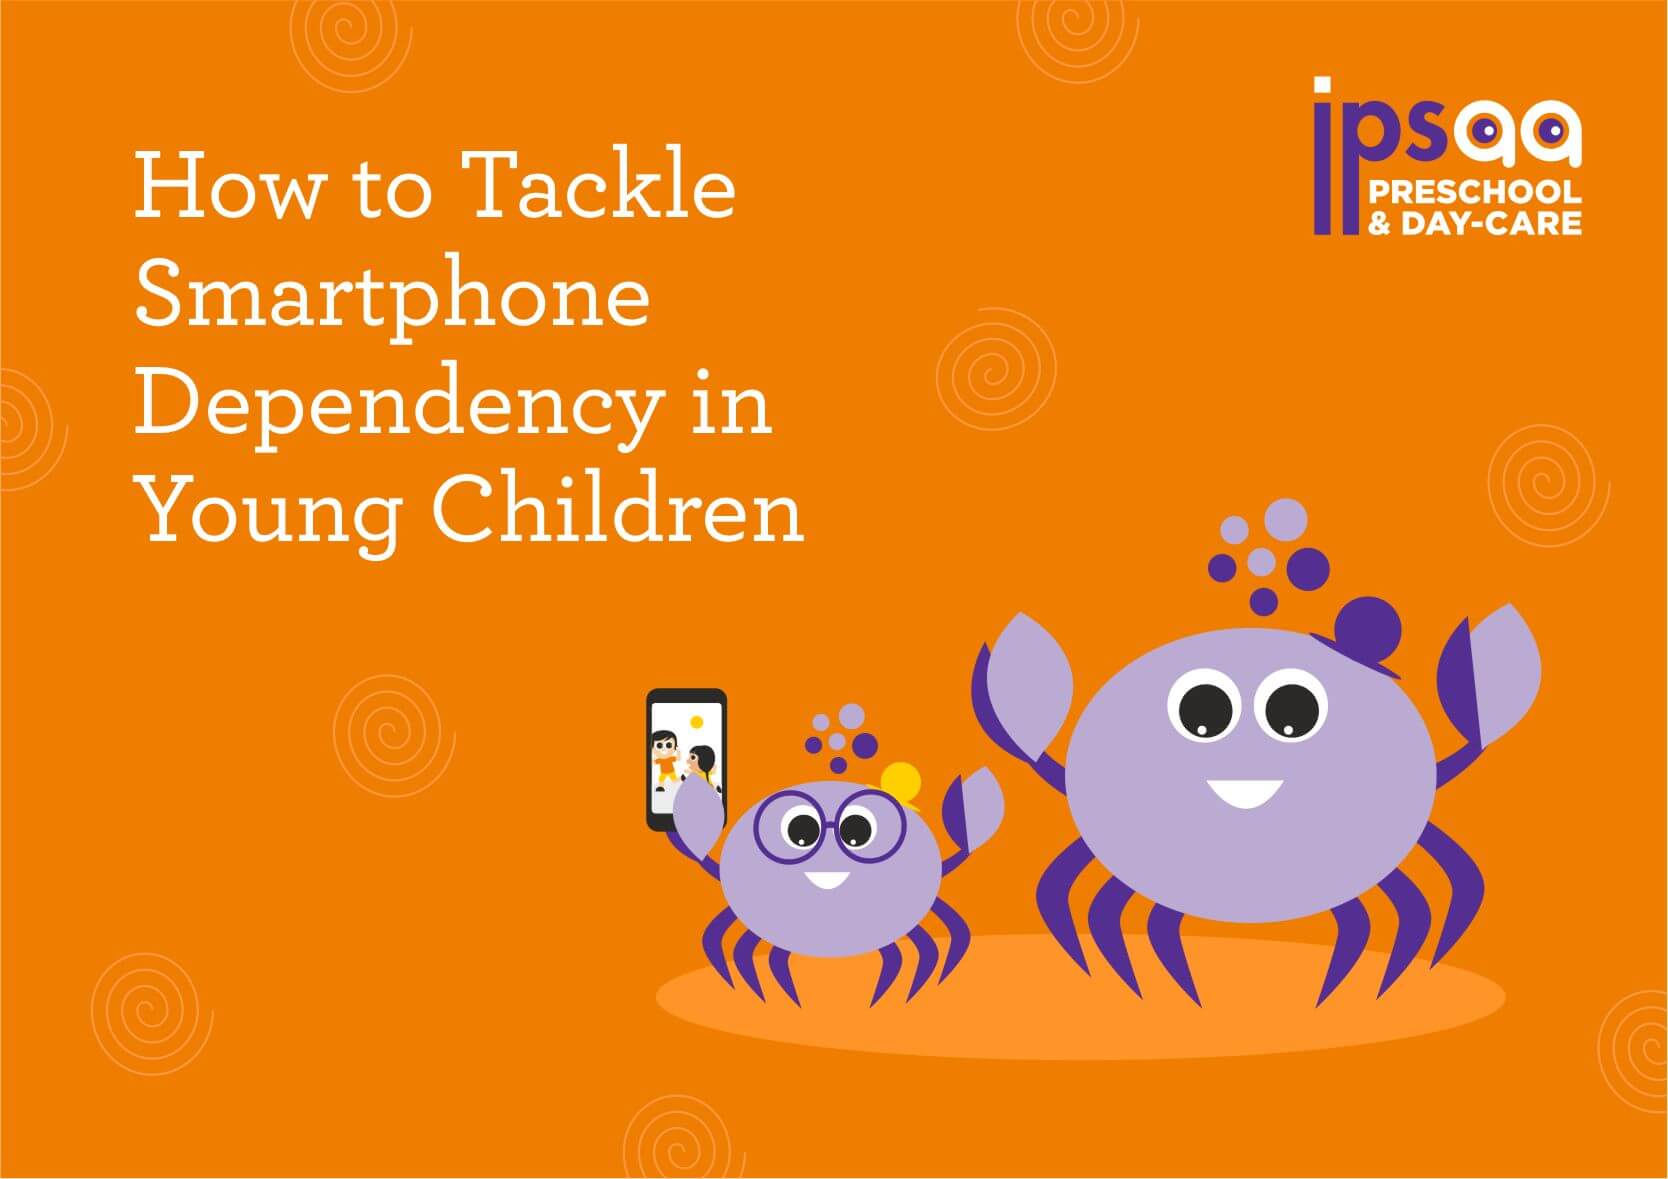 How to tackle smartphone dependency in young children